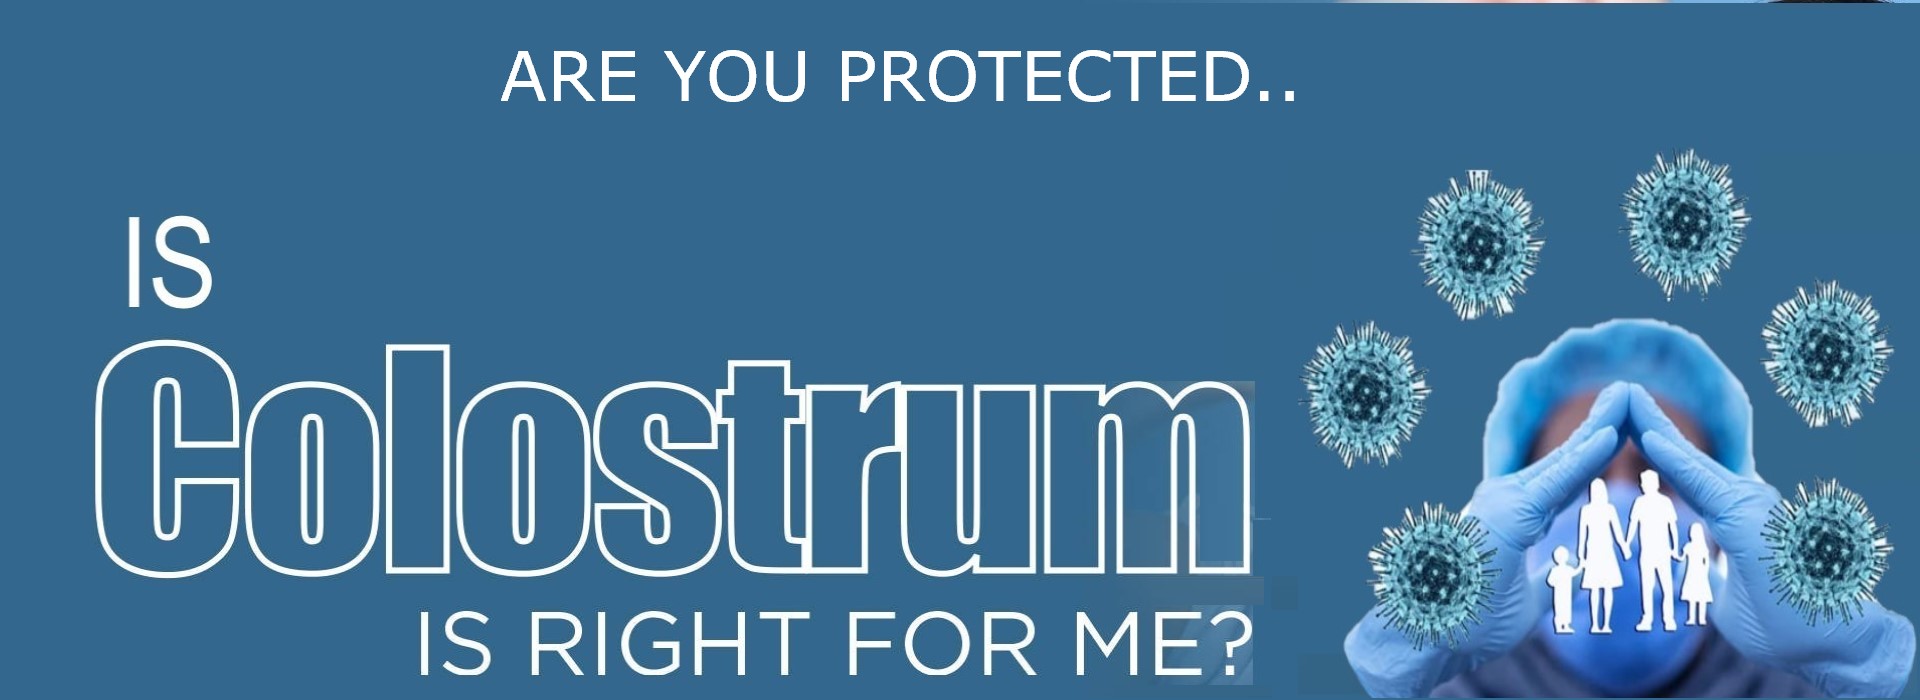 Do You Have A Protection Plan In Place? We Do With Anovite Colostrum6